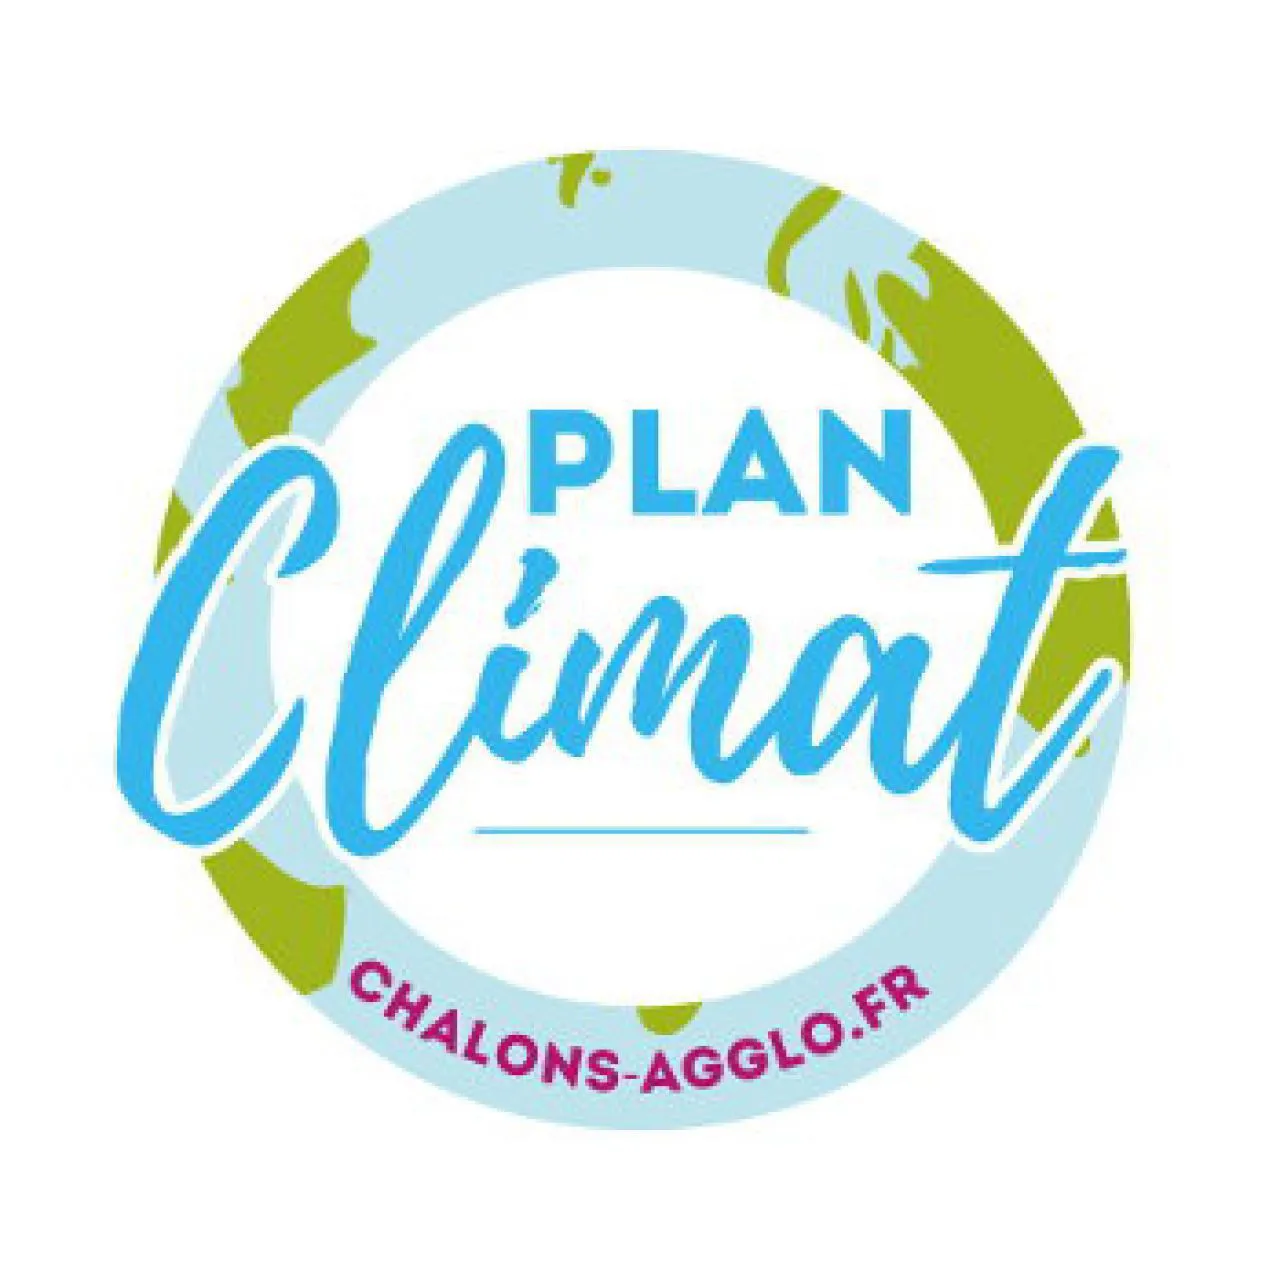 Plan_climat_chalons_agglo